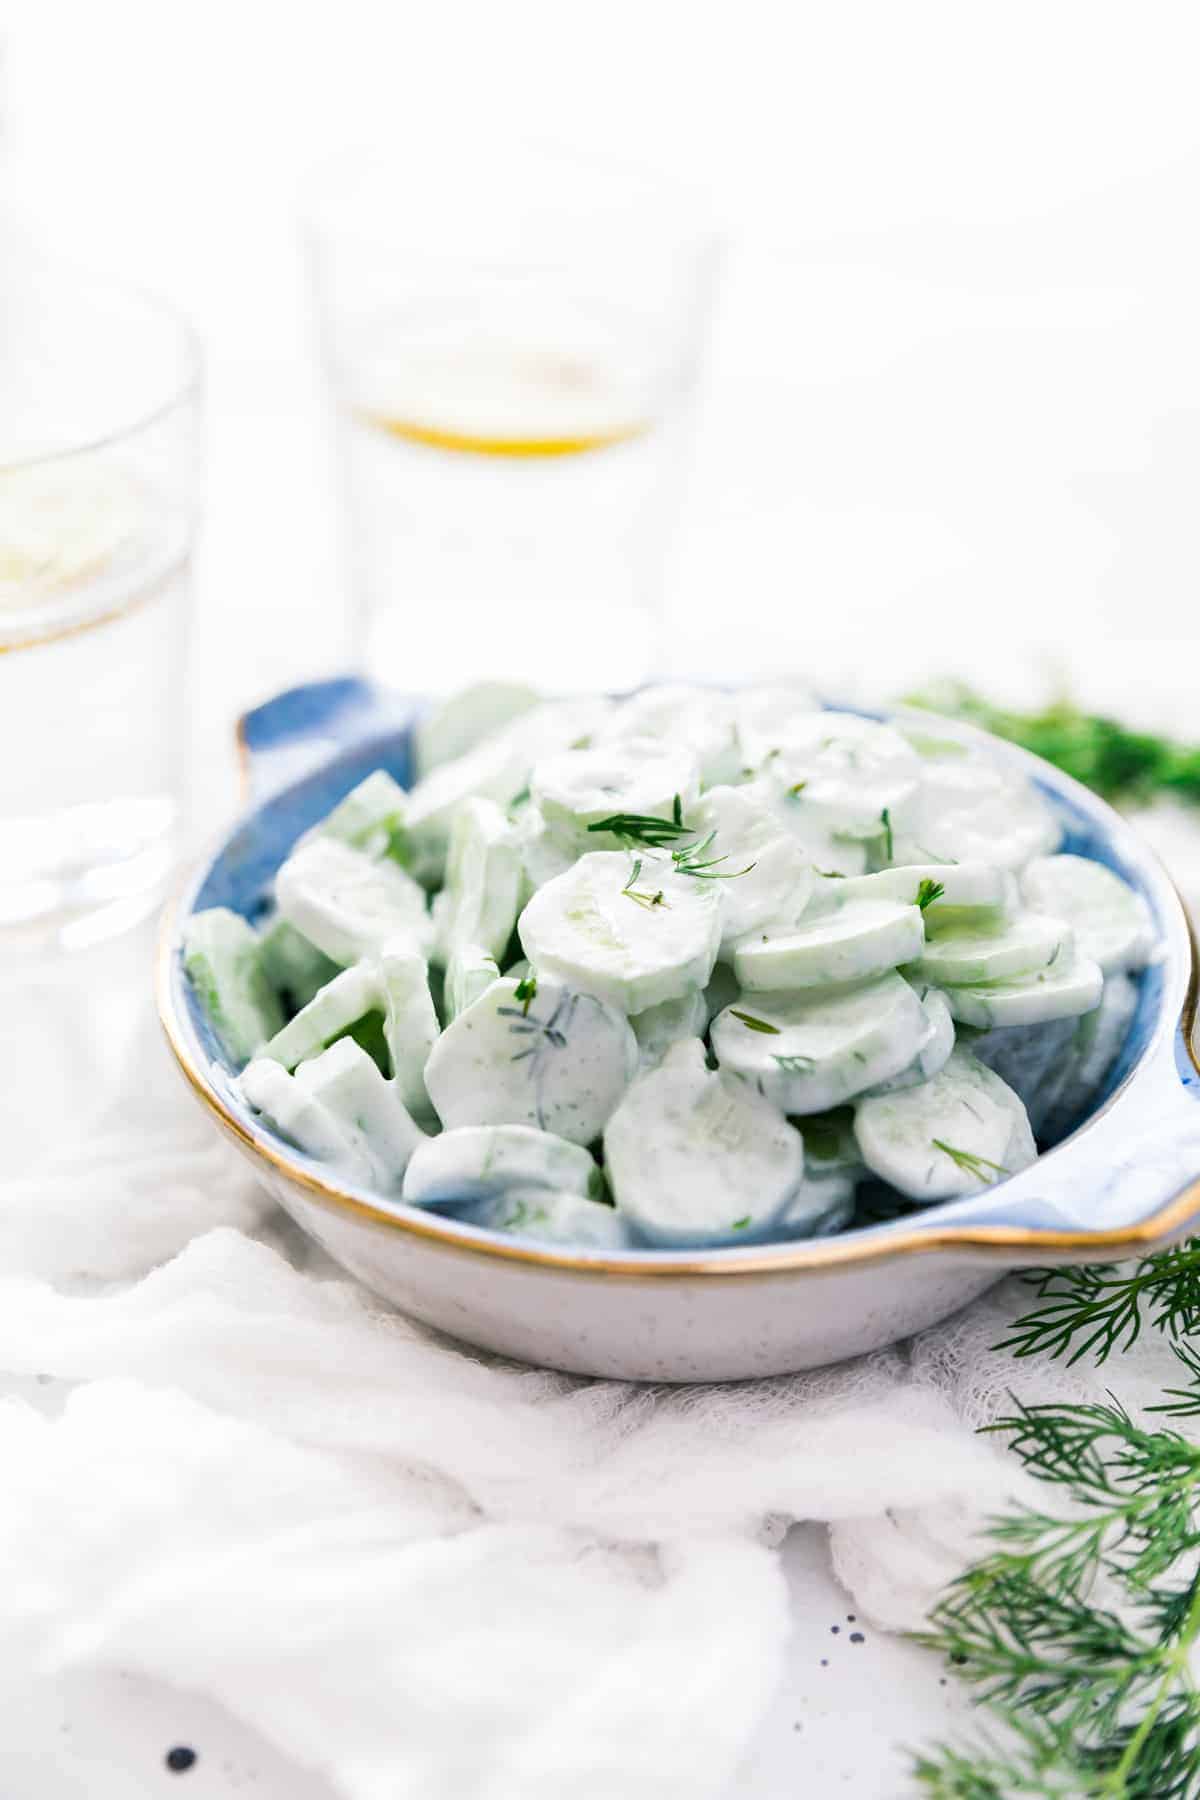 Midwestern Creamy Cucumber and Vinegar Salad made with fresh cucumbers, sour cream, vinegar, and fresh herbs, a summer stable for every picnic and cookout!